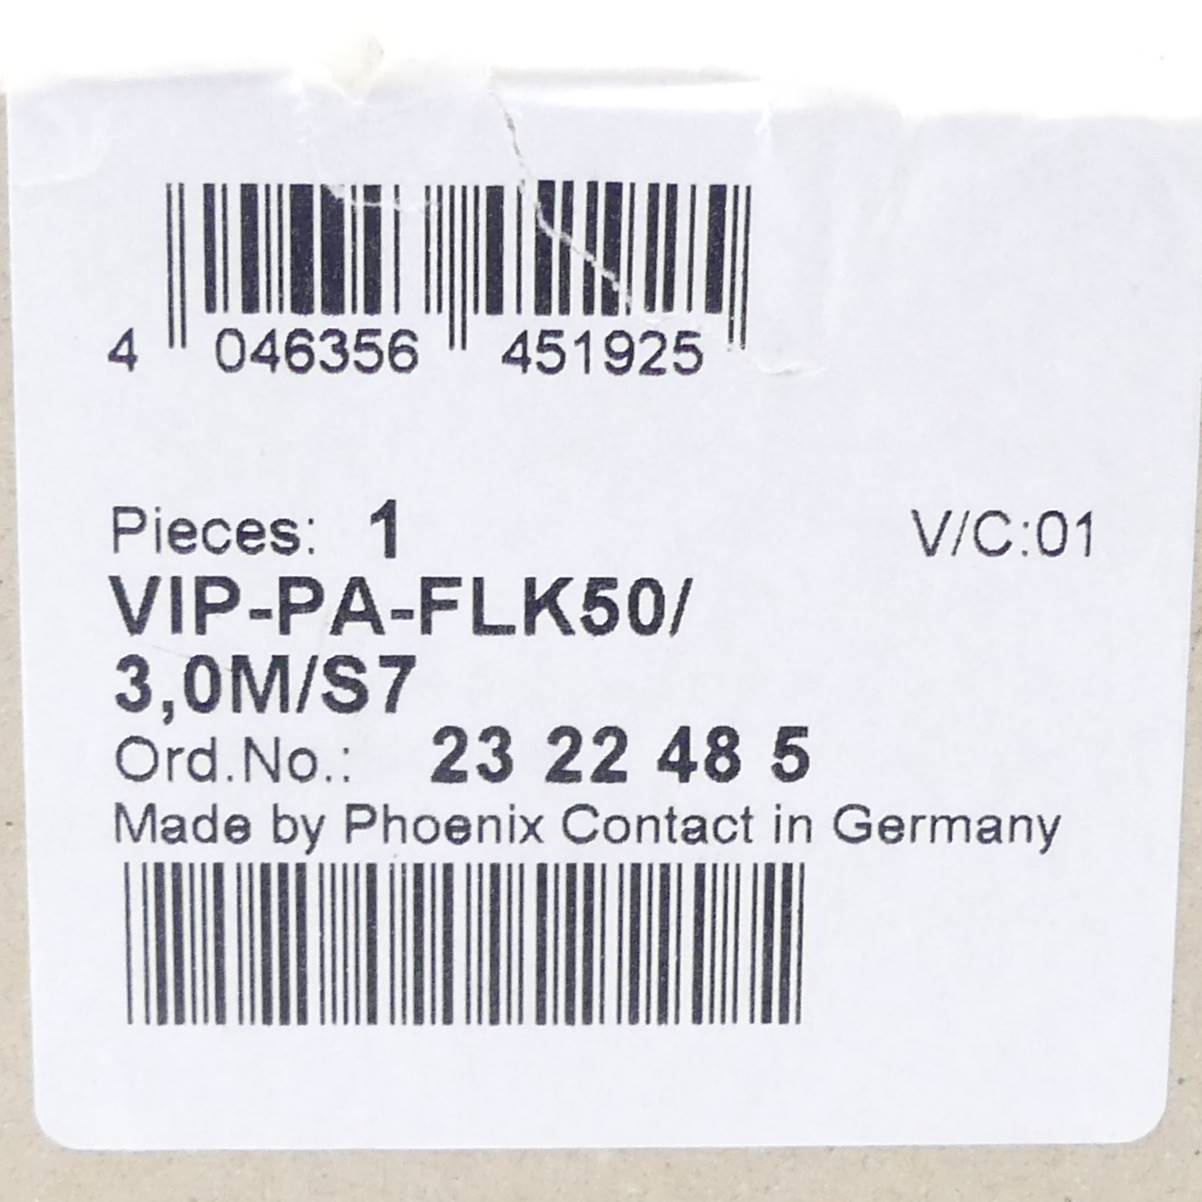 Frontadapter - VIP-PA-FLK50/ 3,0M/S7 